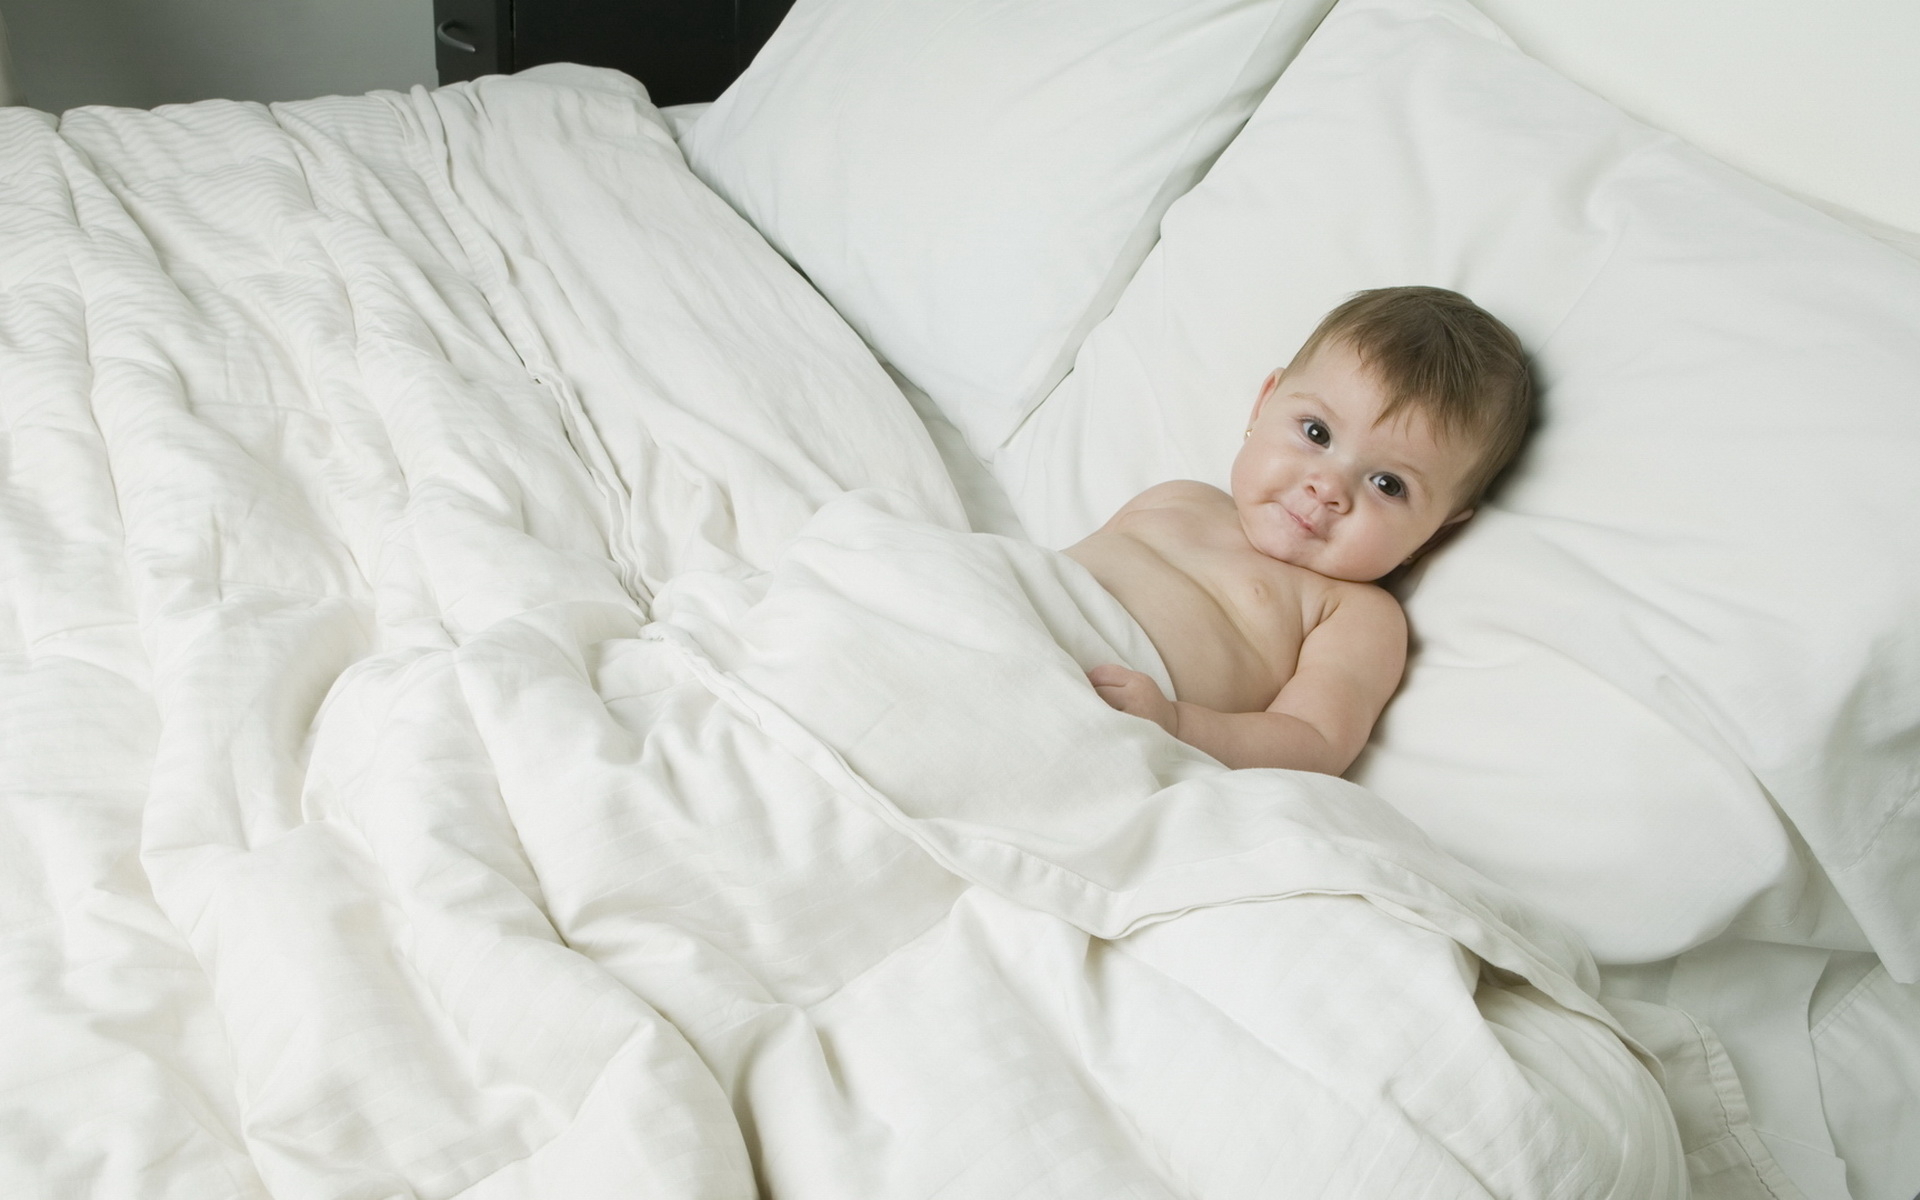 Baby on the bed wallpapers and images - wallpapers, pictures, photos